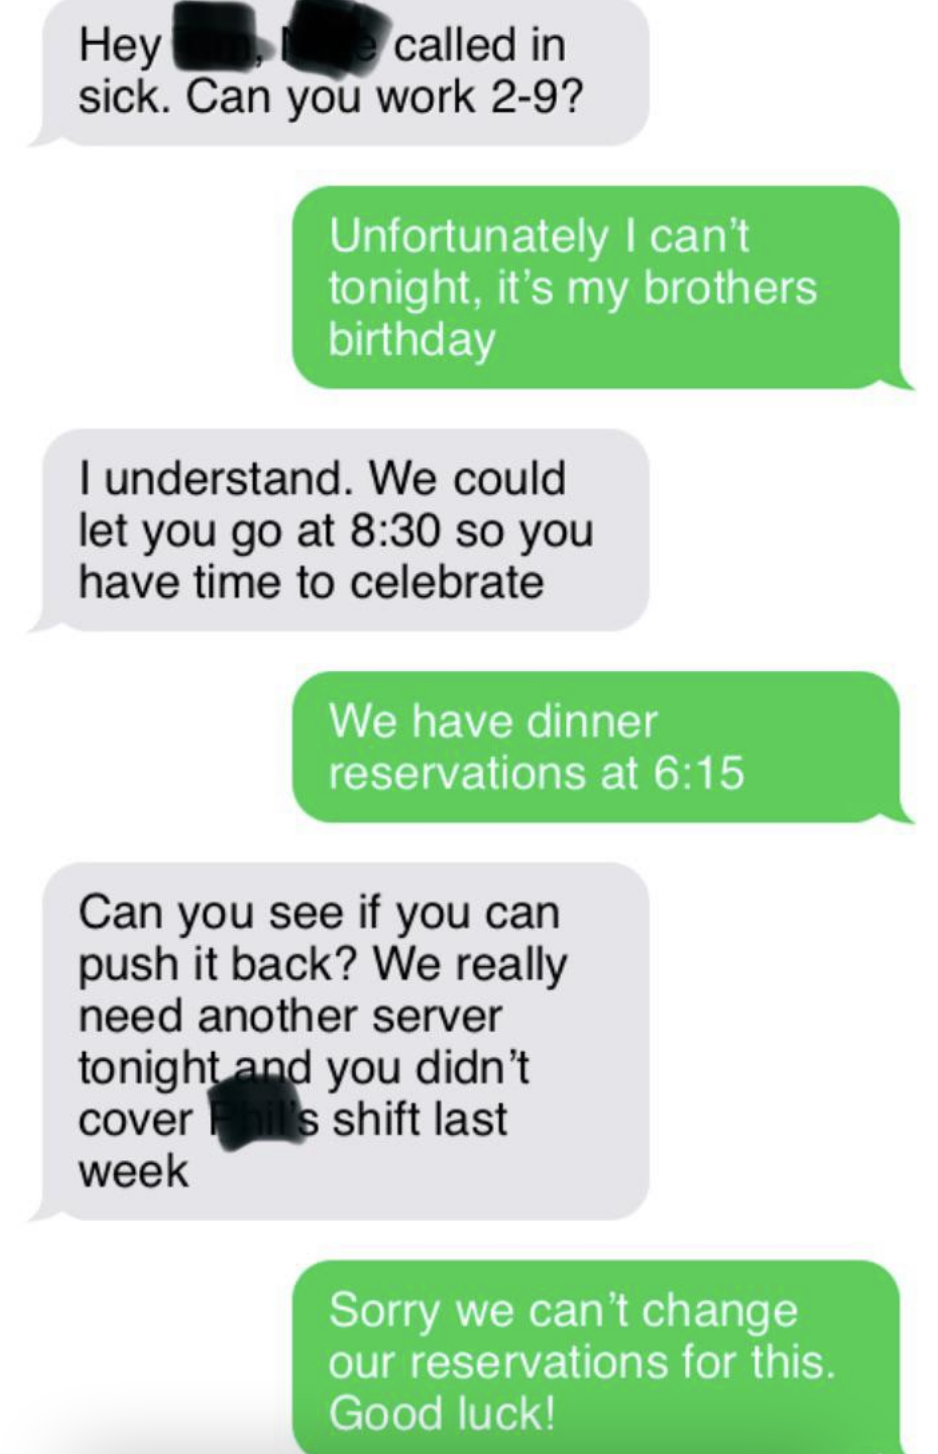 Boss asks if worker can cover someone else&#x27;s shift, then says they can let the worker go at 8:30 to celebrate brother&#x27;s bday, and when worker says they have a 6:15 dinner appt, boss asks if they can push it back